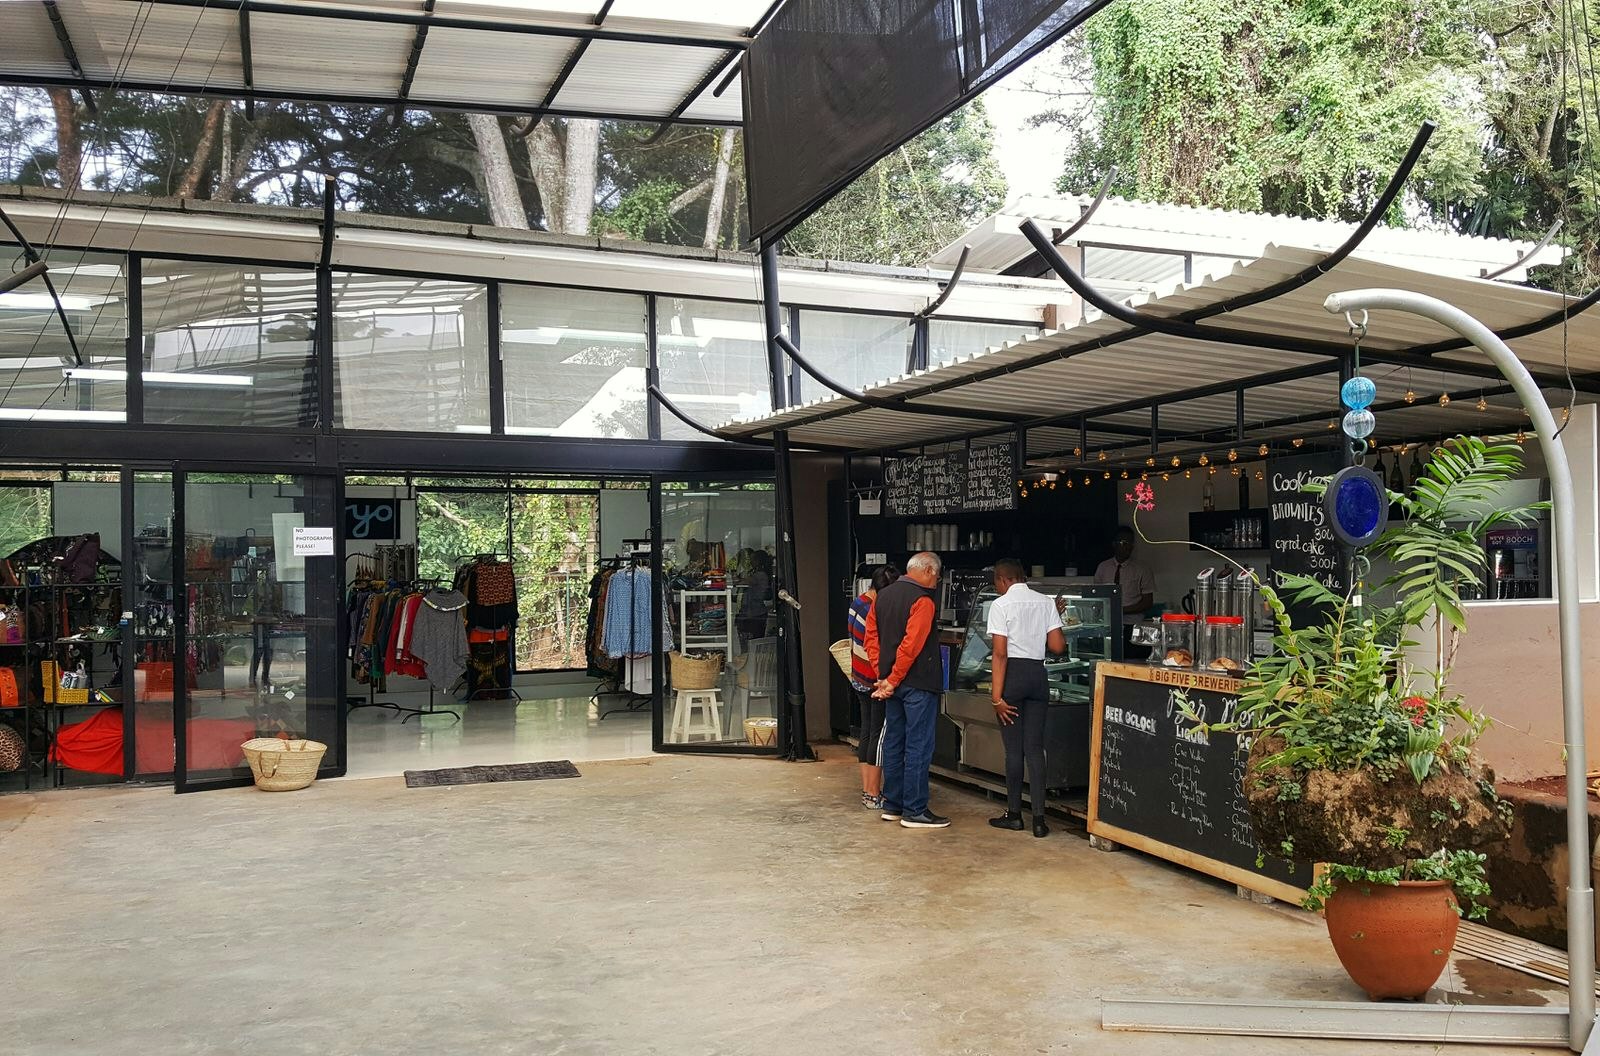 An elderly couple stand on a polished concrete floor in a bright, open-air atrium and ponder choices in a cafe display case. Above them is a view out to you lush trees and the sky. Inside the store beyond are various woven clothing items for sale © Clementine Logan / Lonely Planet